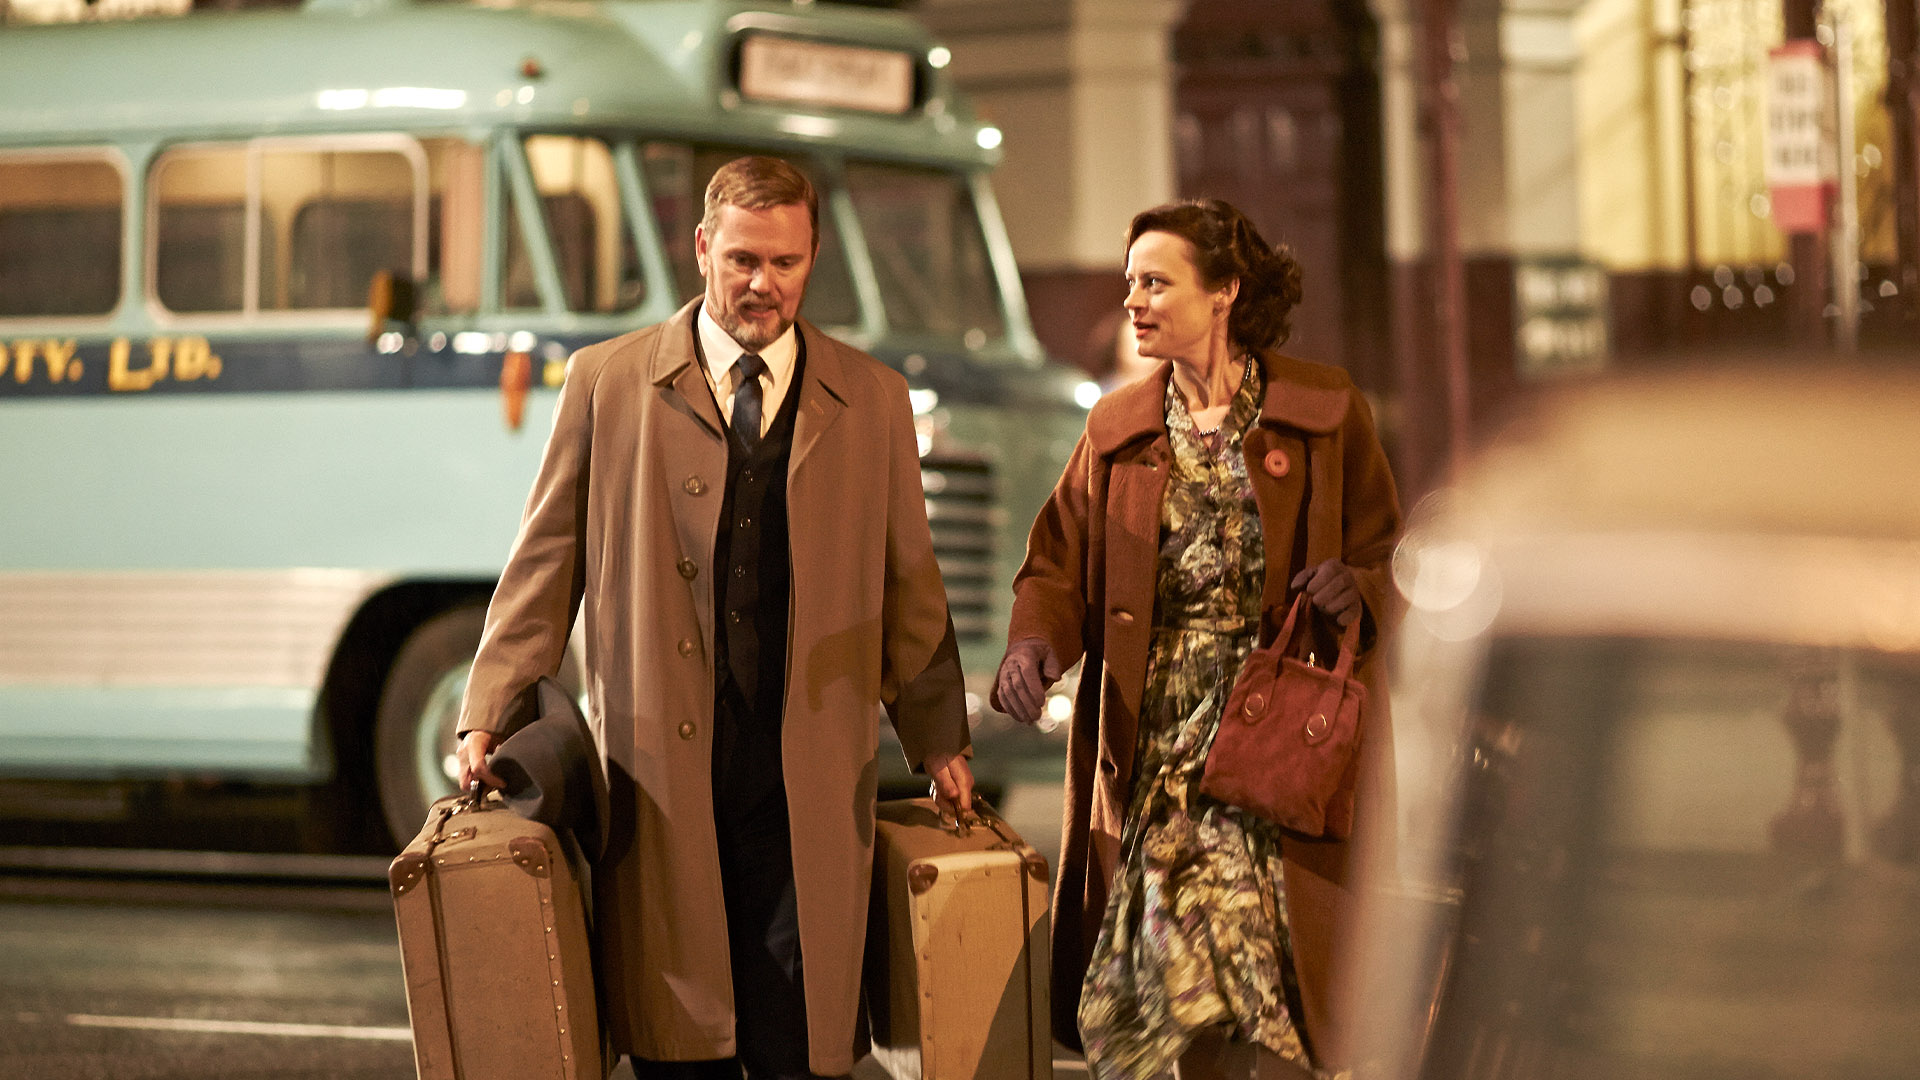 The Doctor Blake Mysteries - S2E1 - The Heart of the Matter